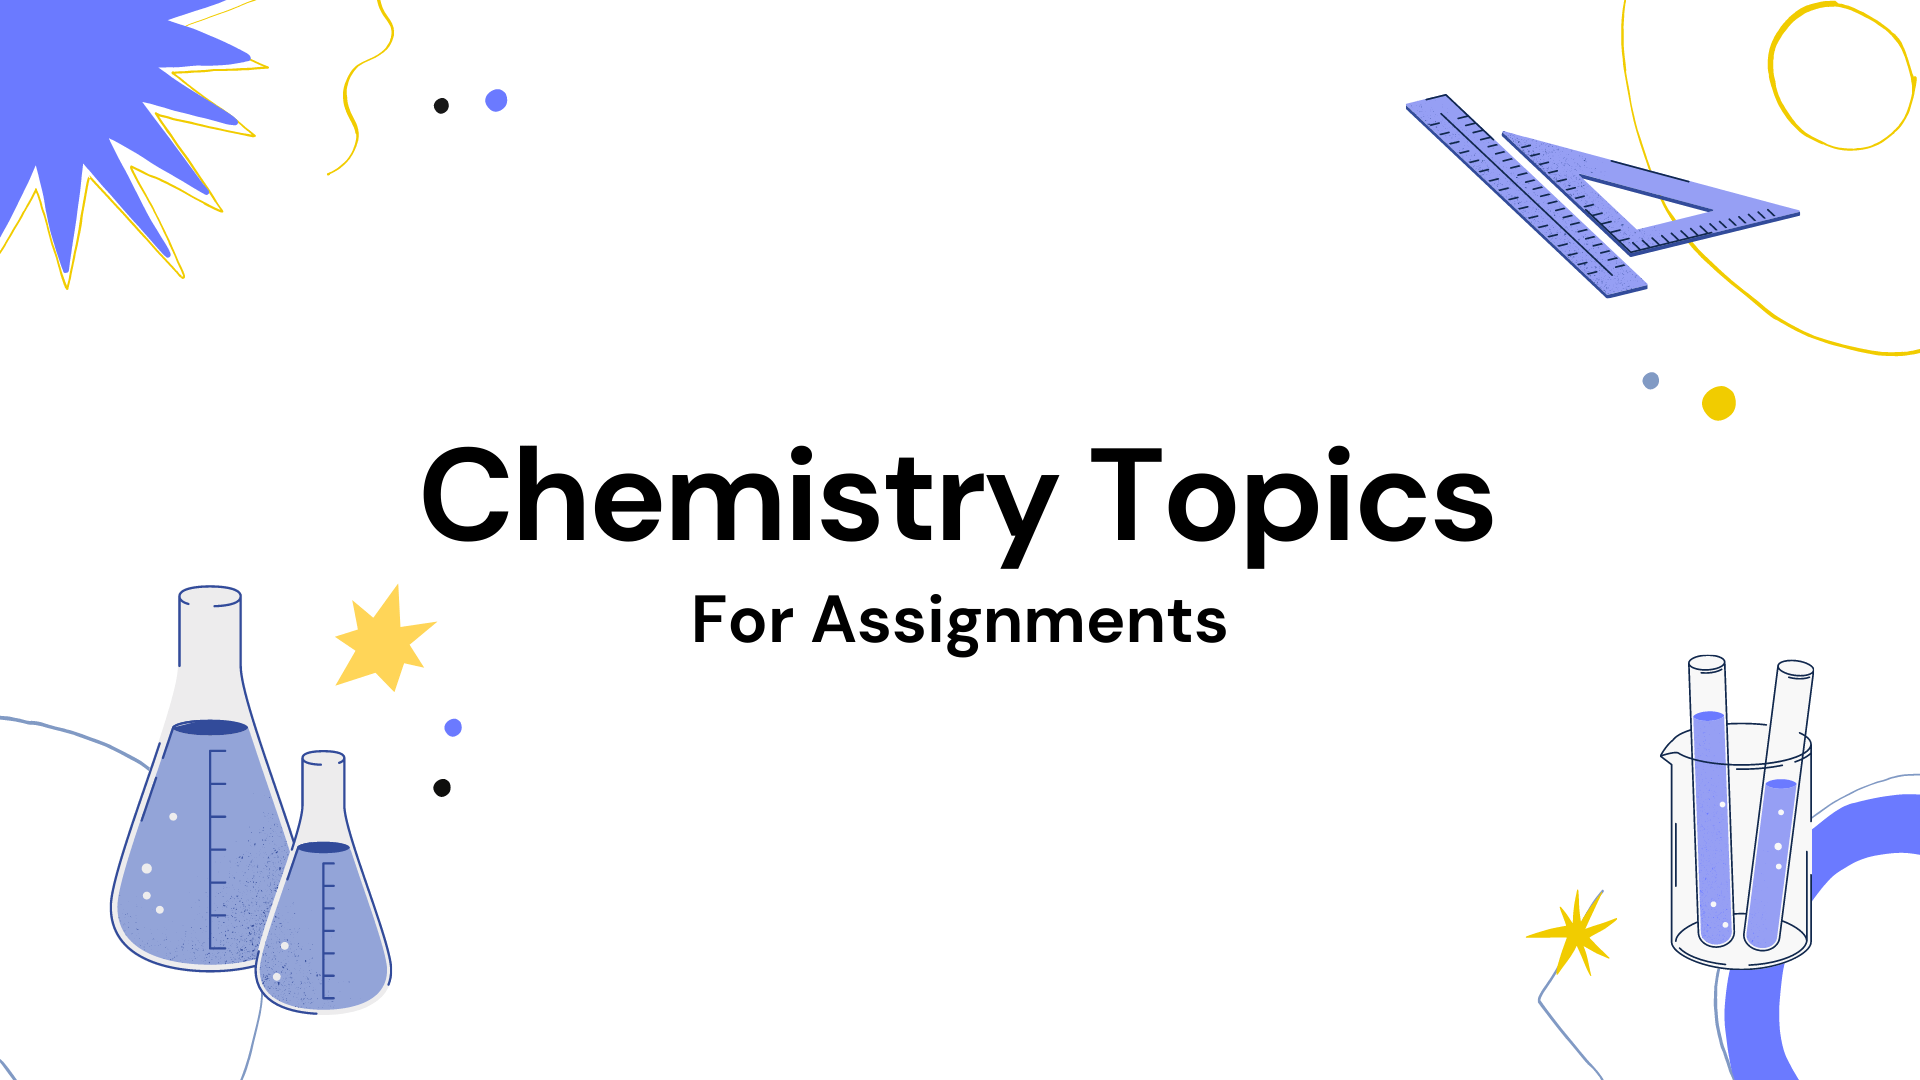 Chemistry Topics for assignments